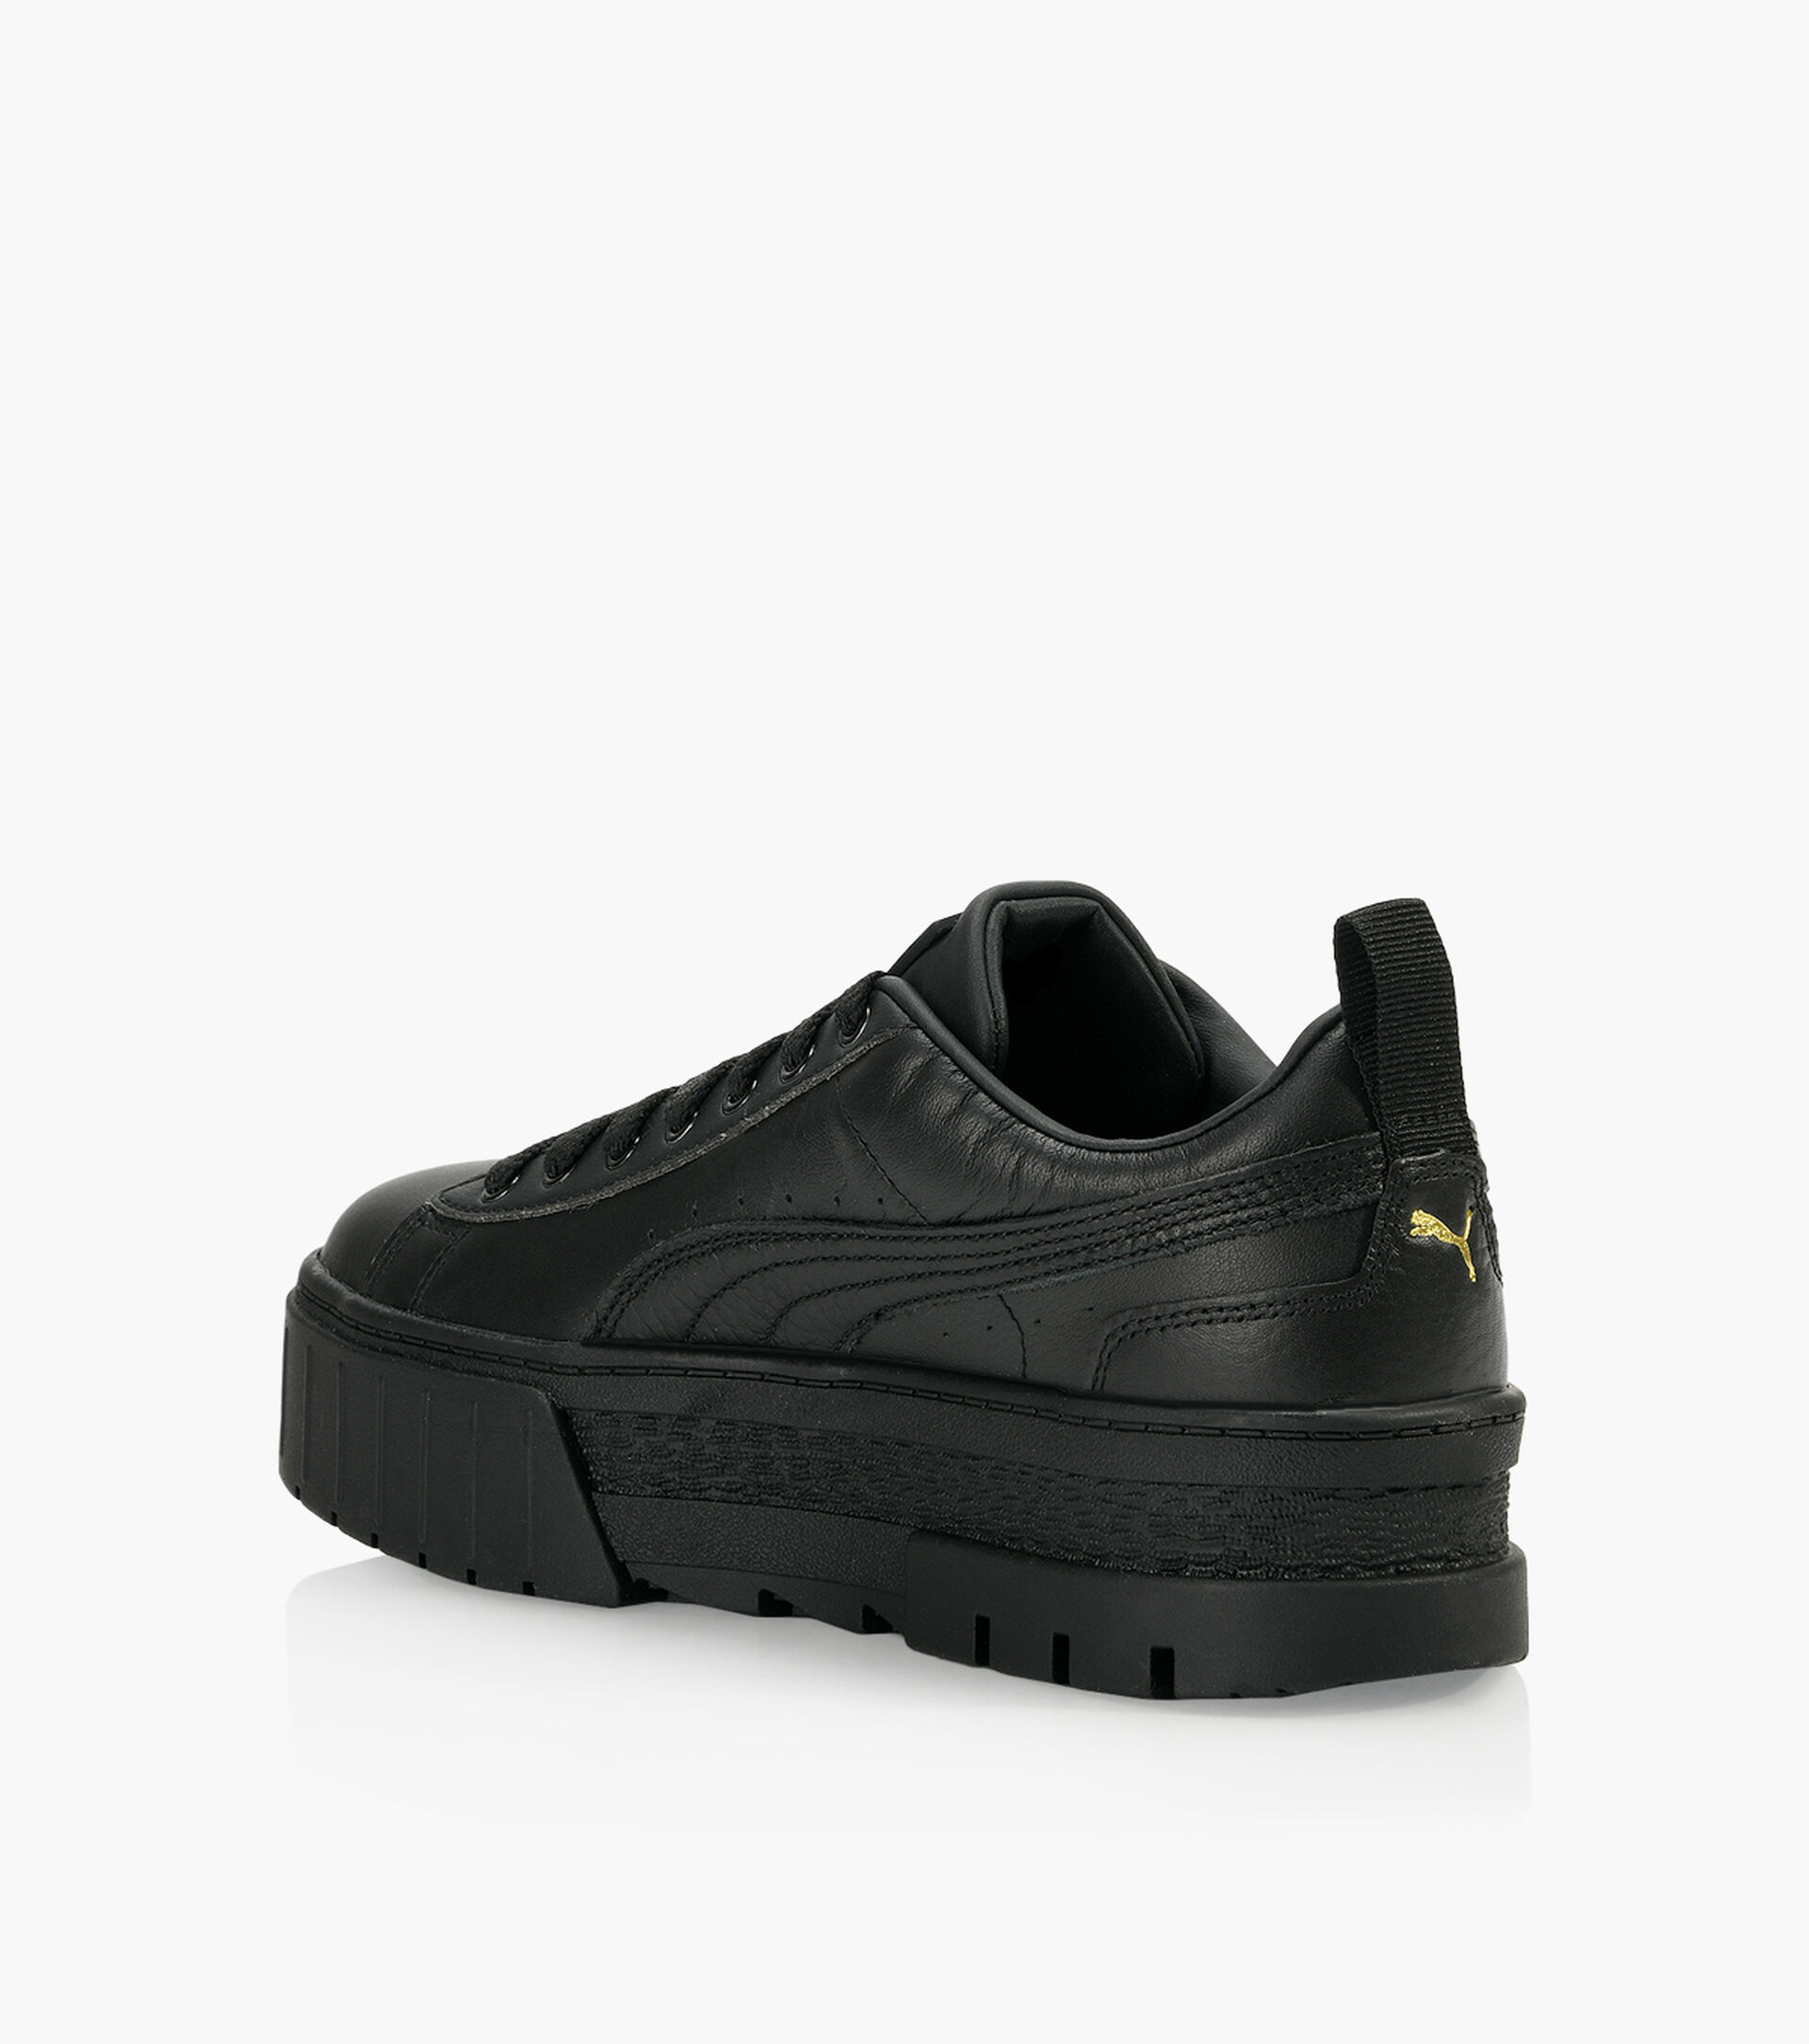 PUMA MAYZE CLASSIC WN'S - Black Leather | Browns Shoes